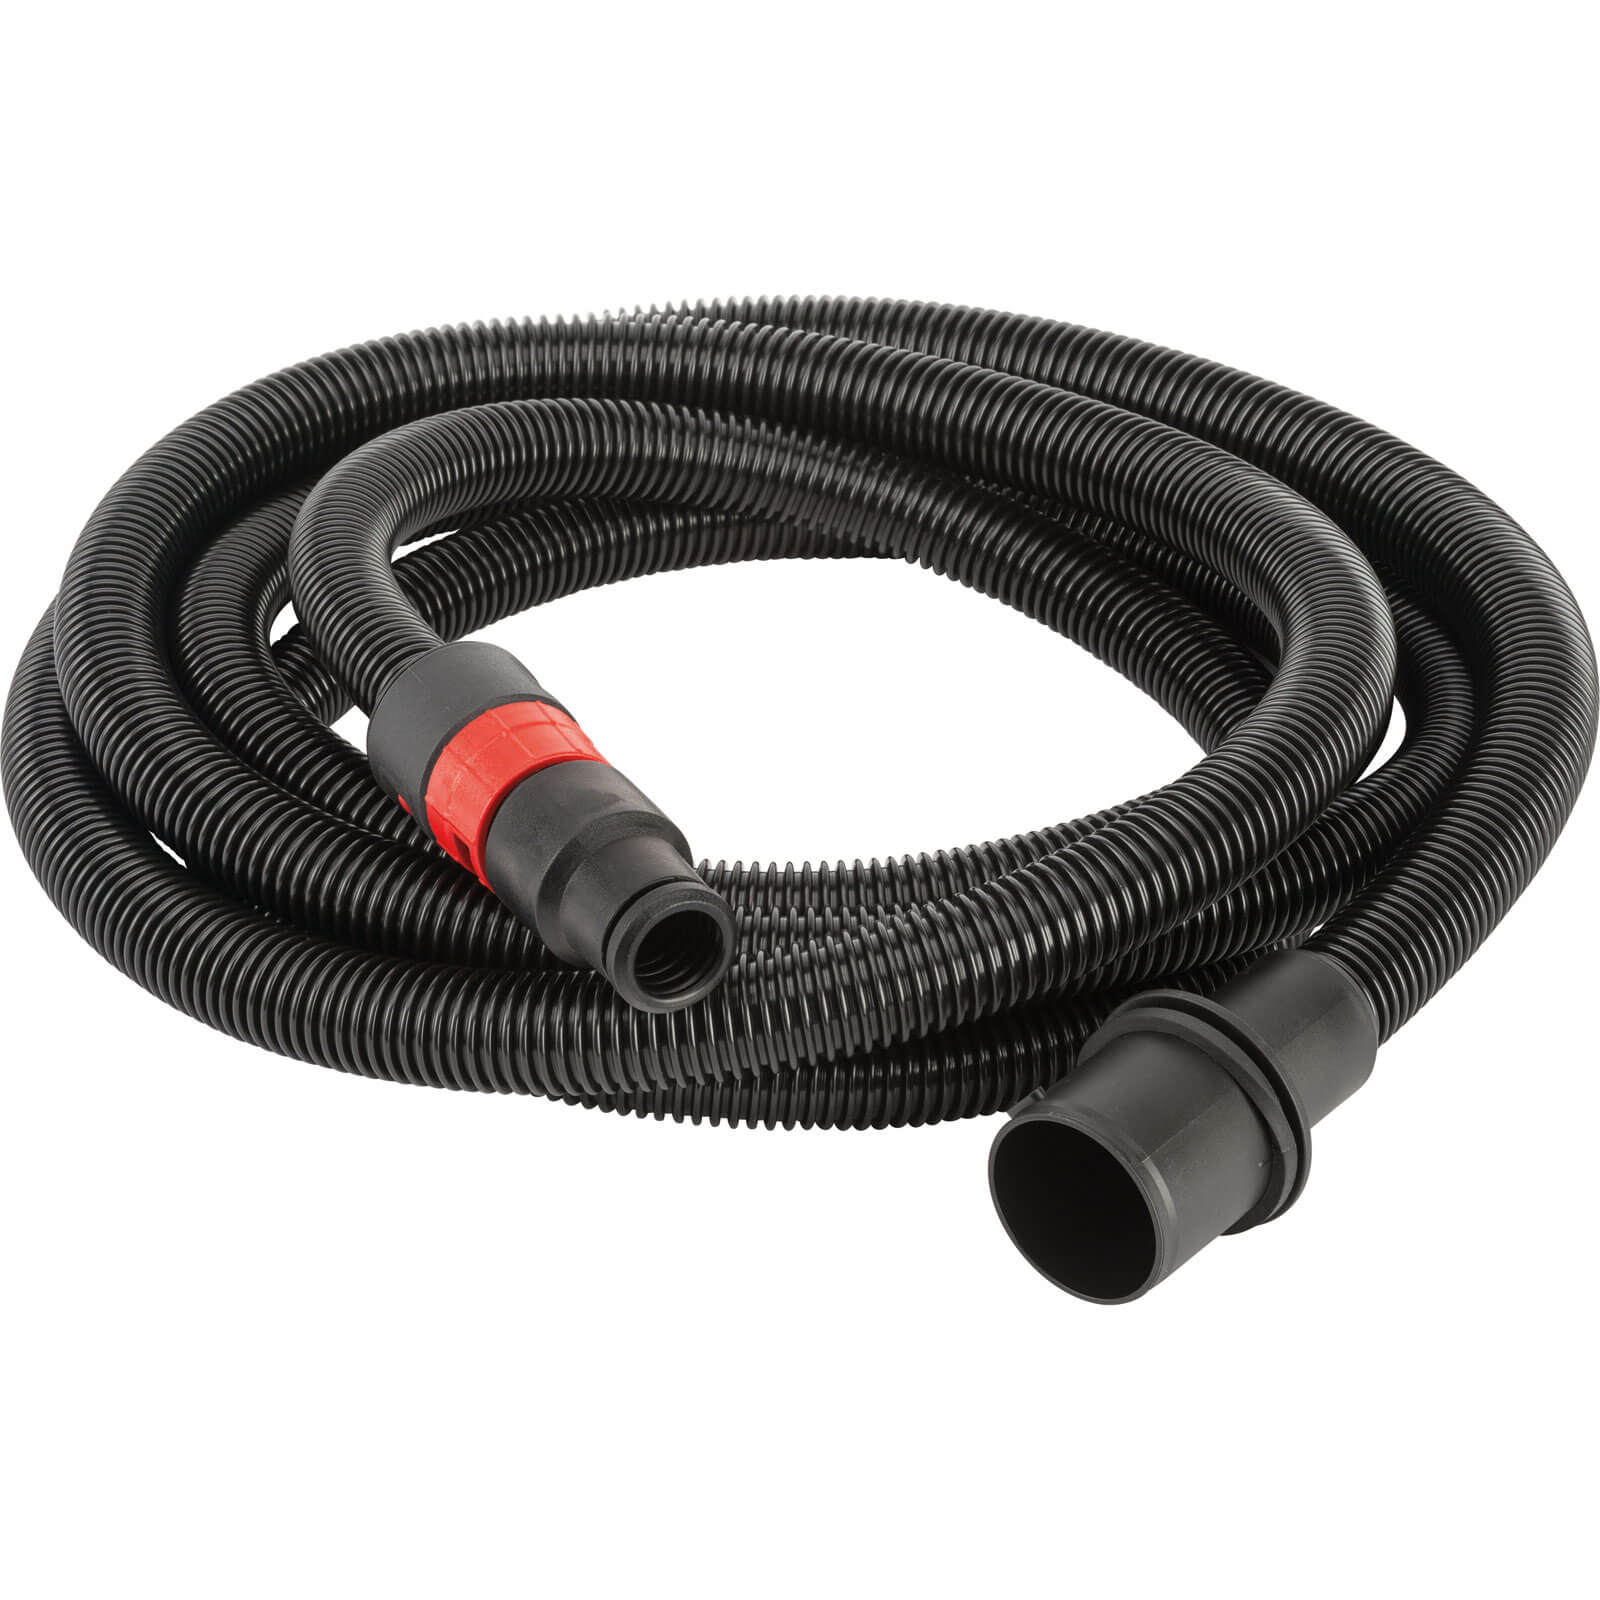 Photo of Bosch Dust Extractor Hose For Gas Extractors 5m